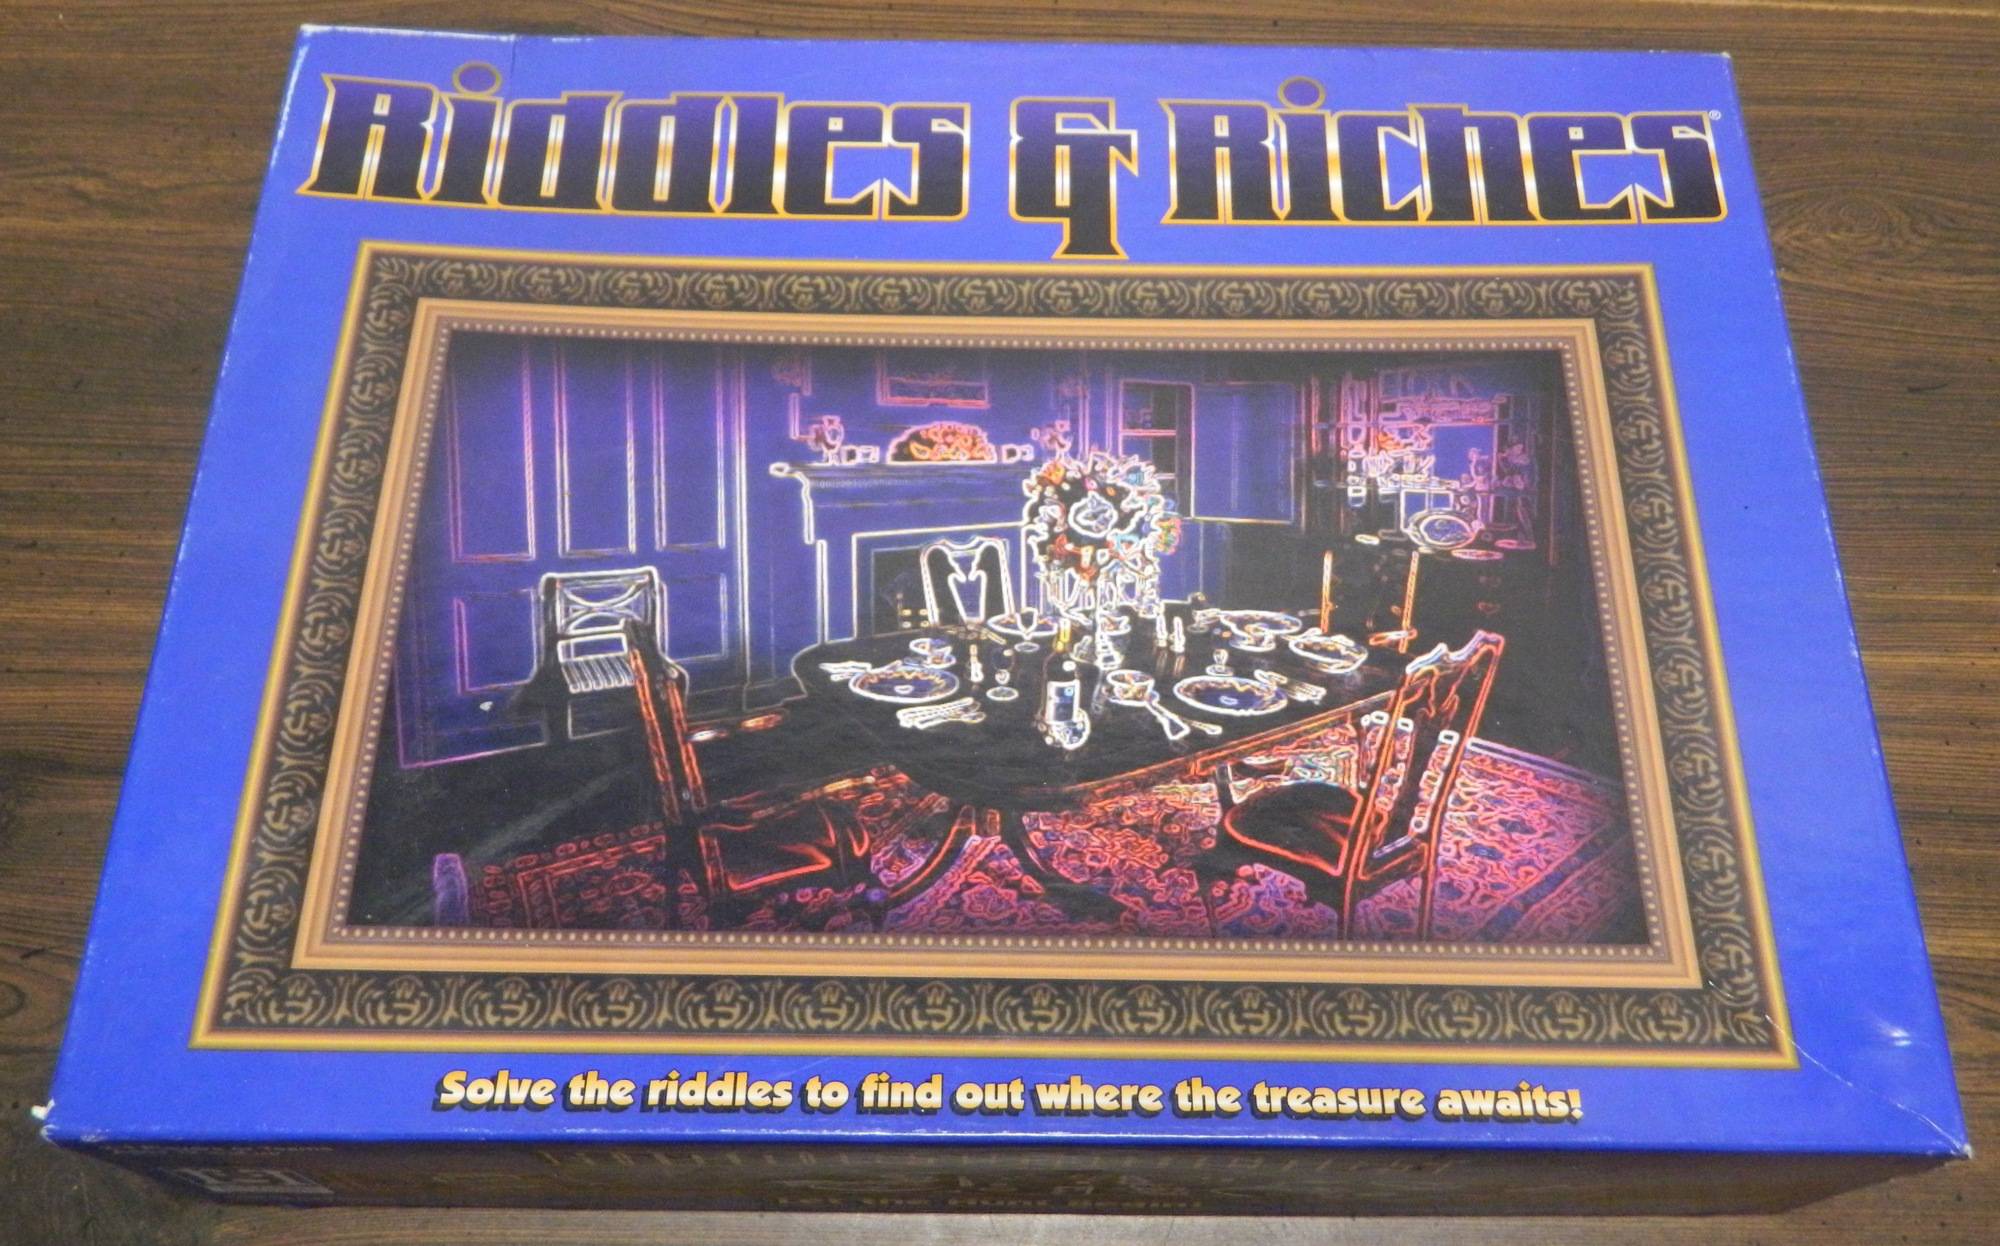 Box for Riddles & Riches